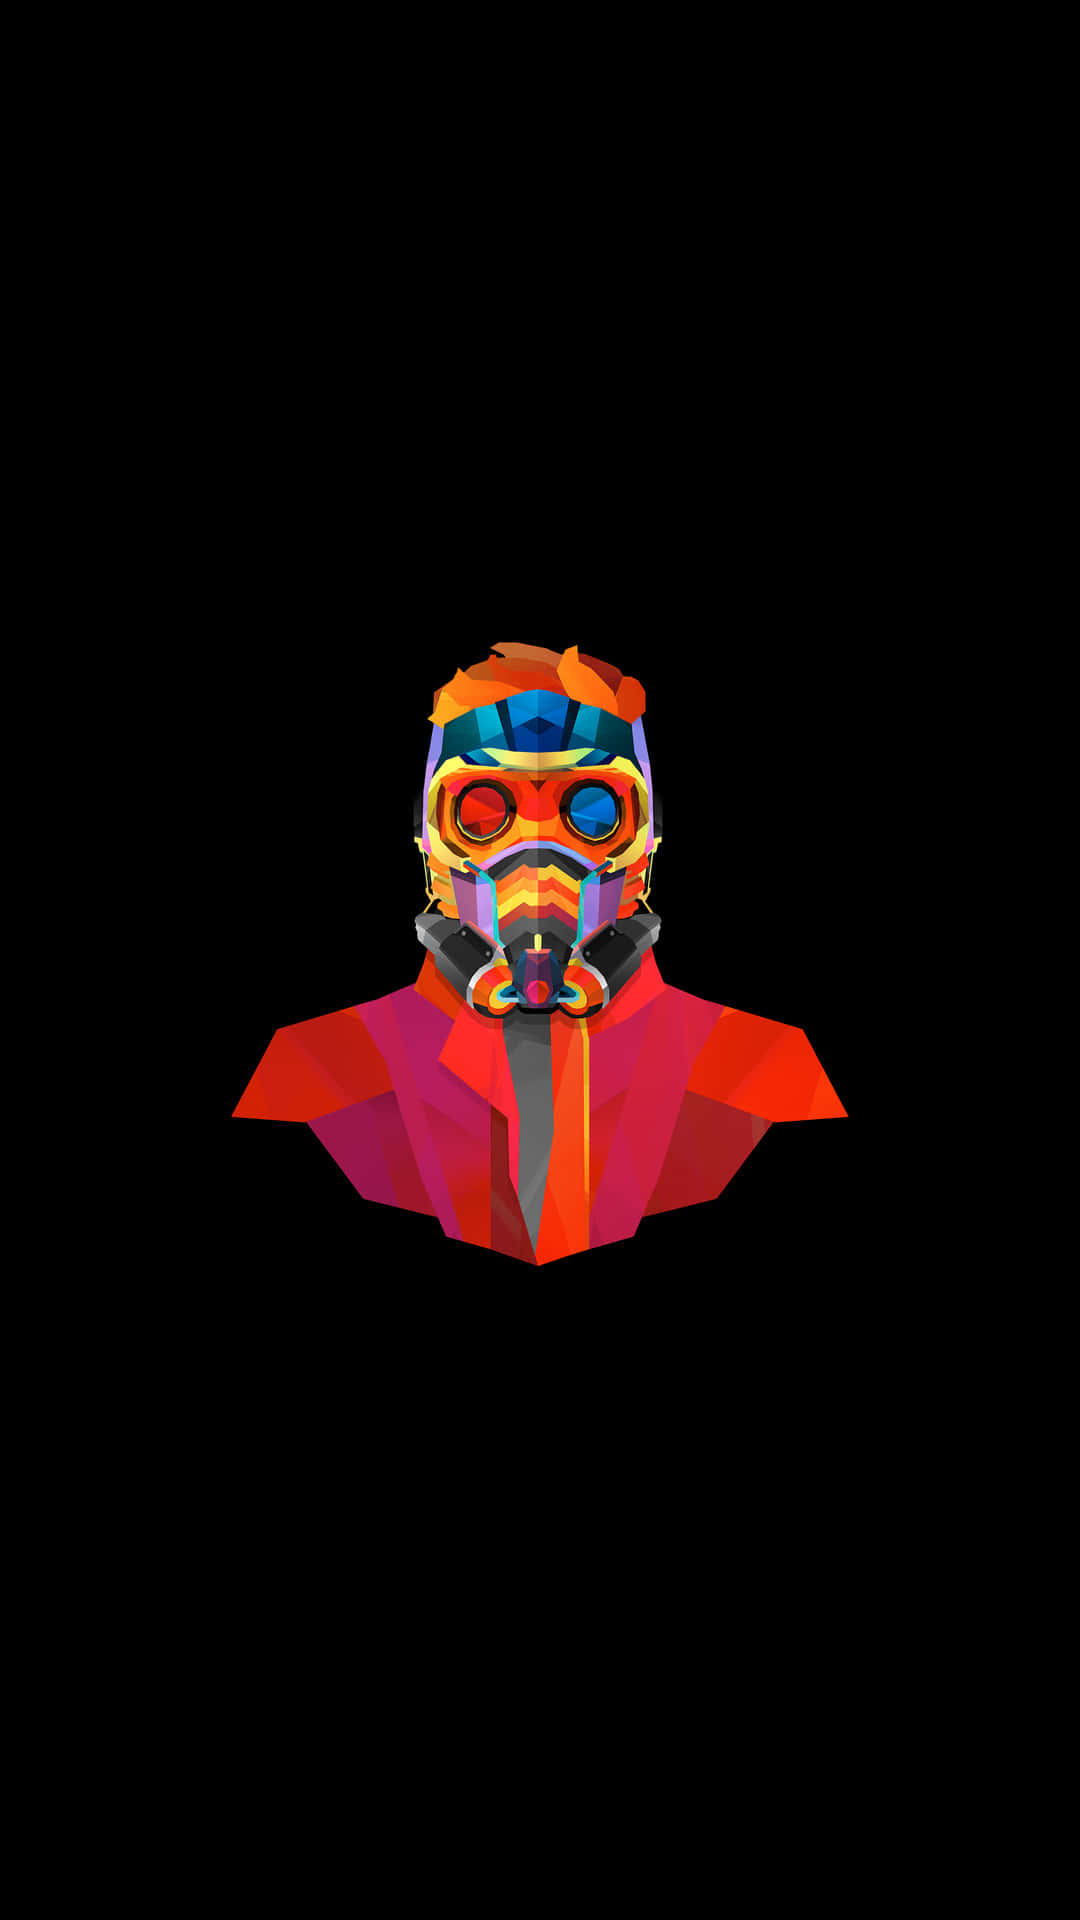 A Colorful Man In A Mask On A Black Background Wallpaper